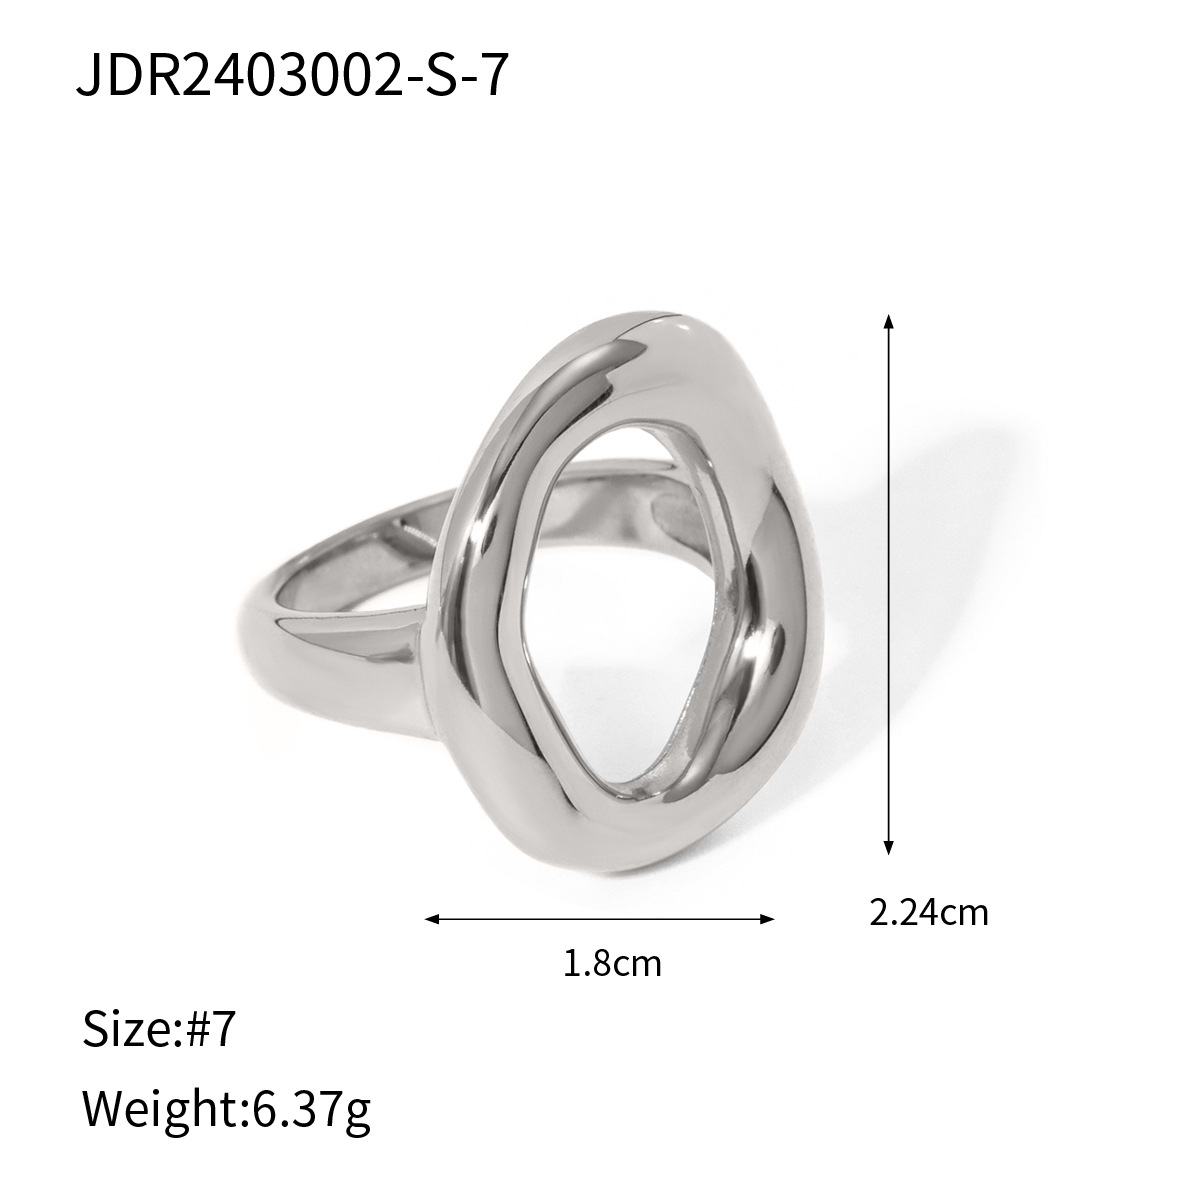 JDR2403002-S-7 size